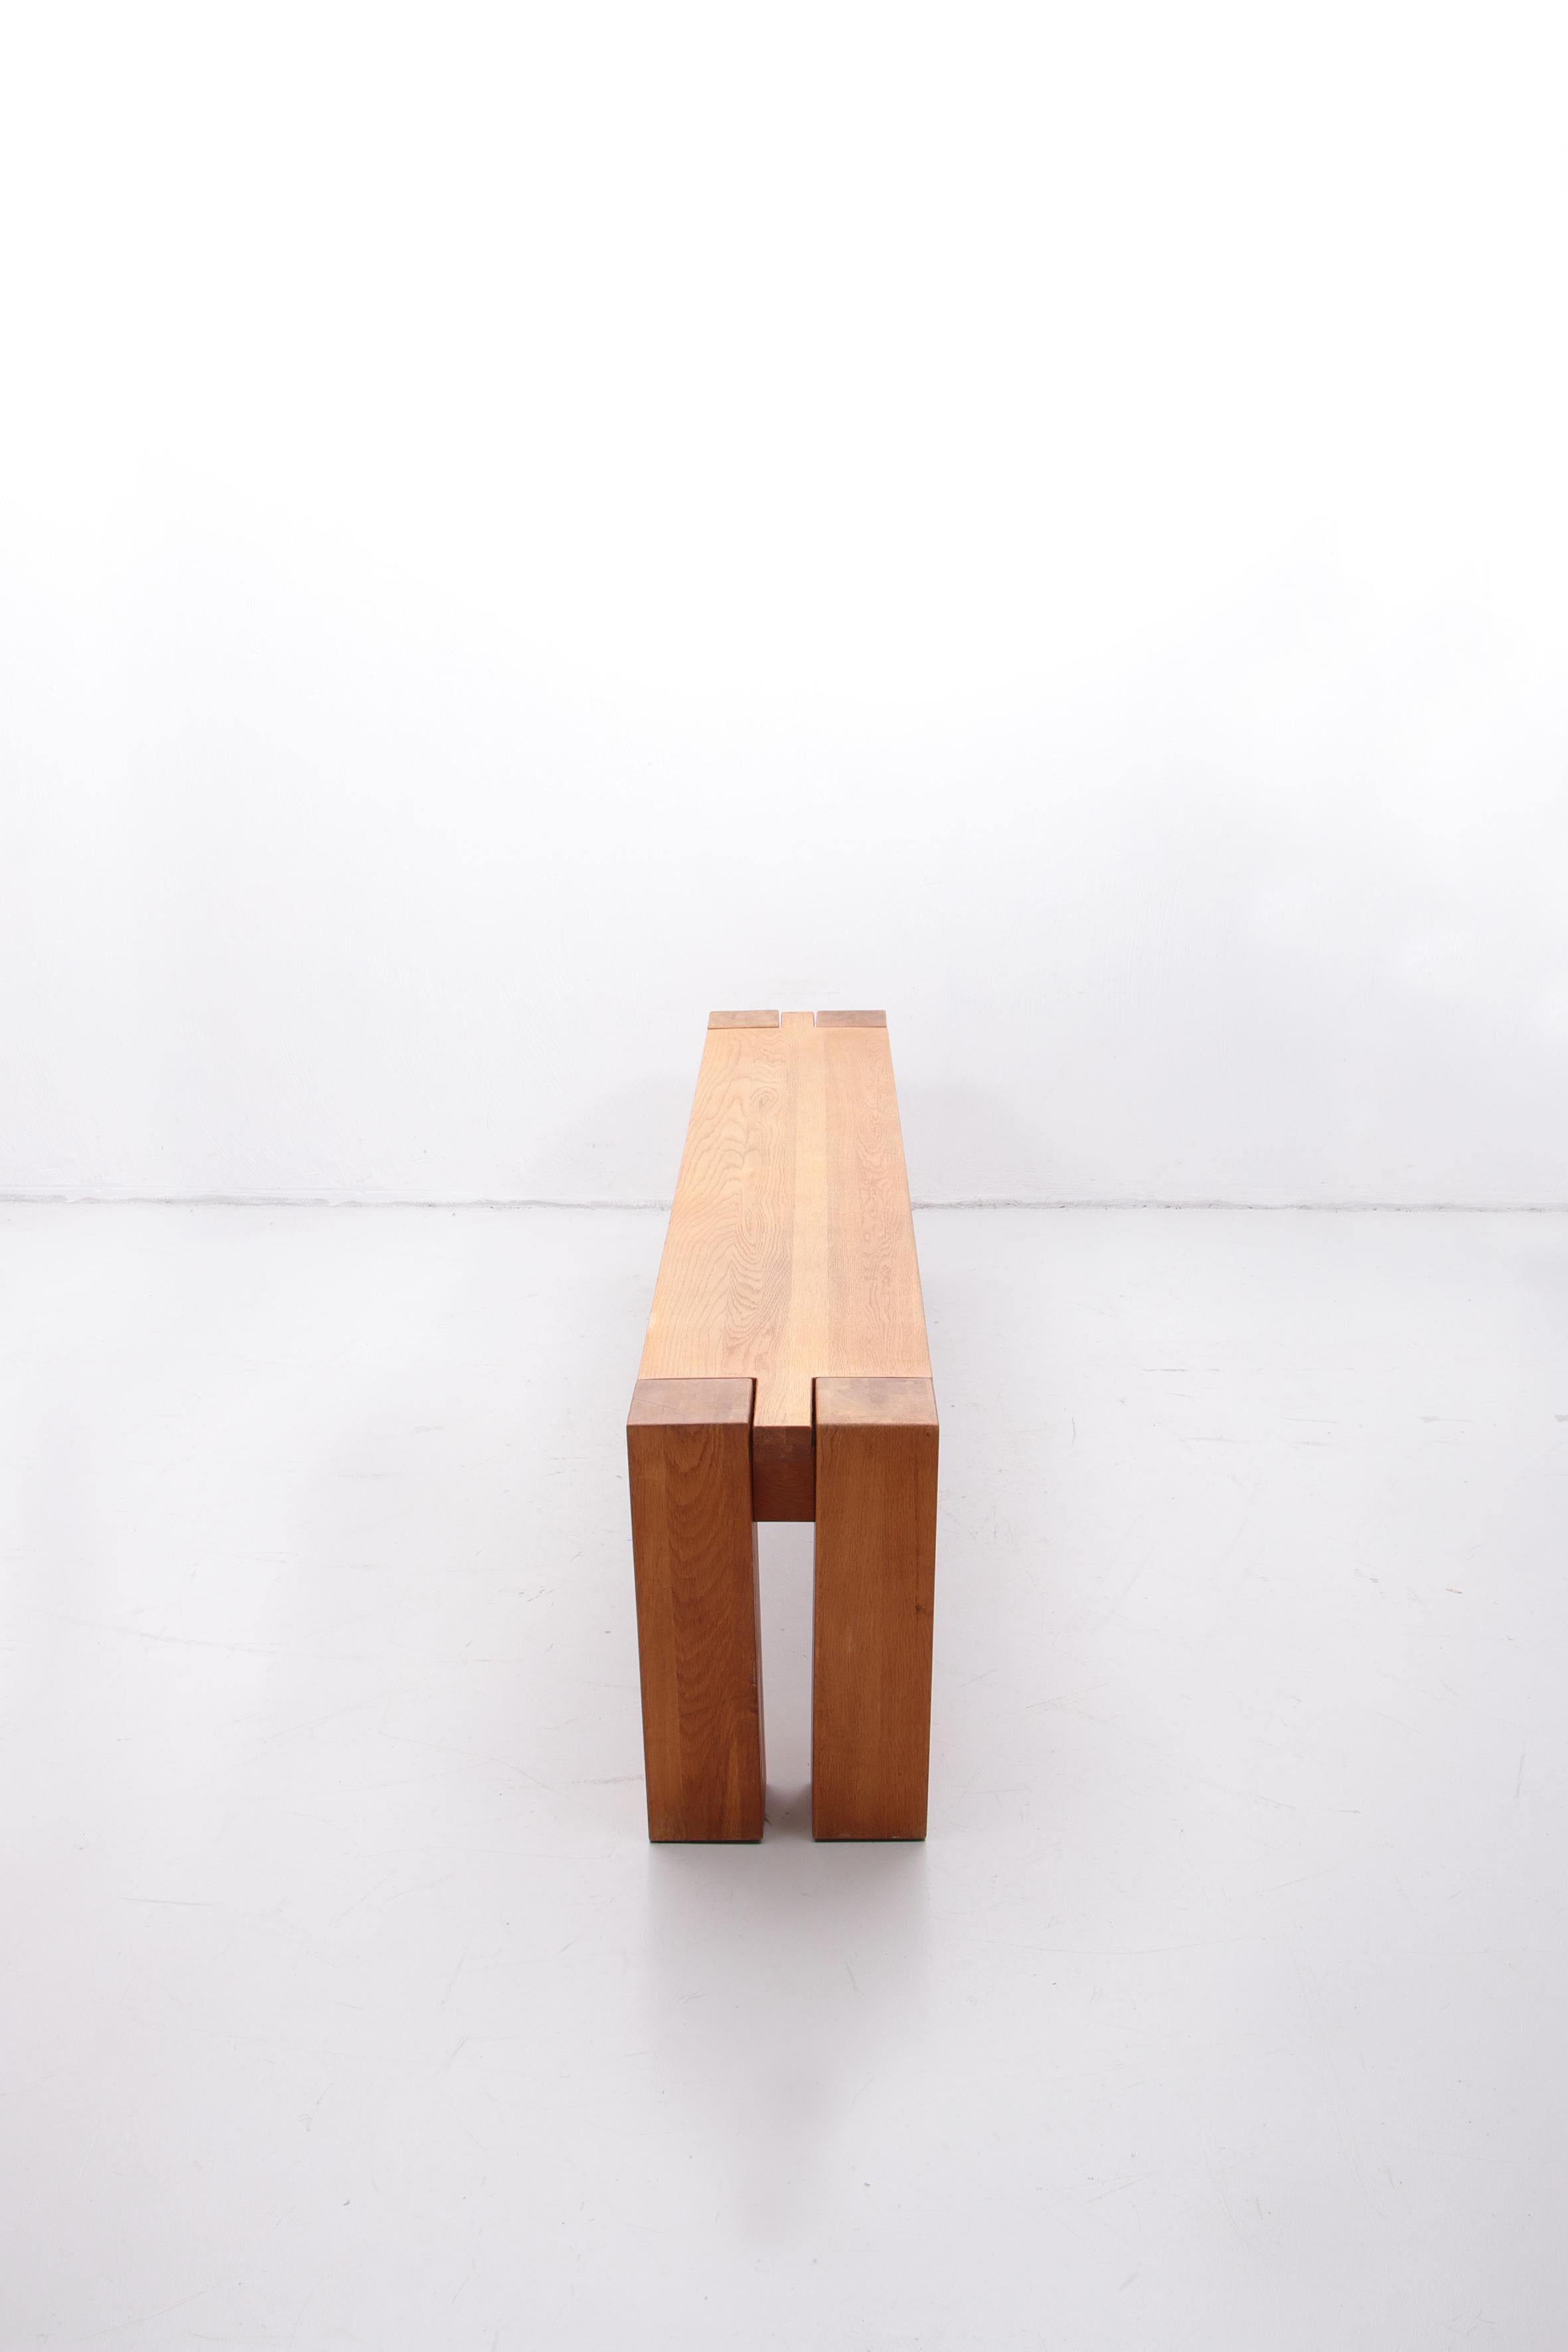 Mid-20th Century Vintage Oak Bench in the Style of Charlotte Perriand, 1960